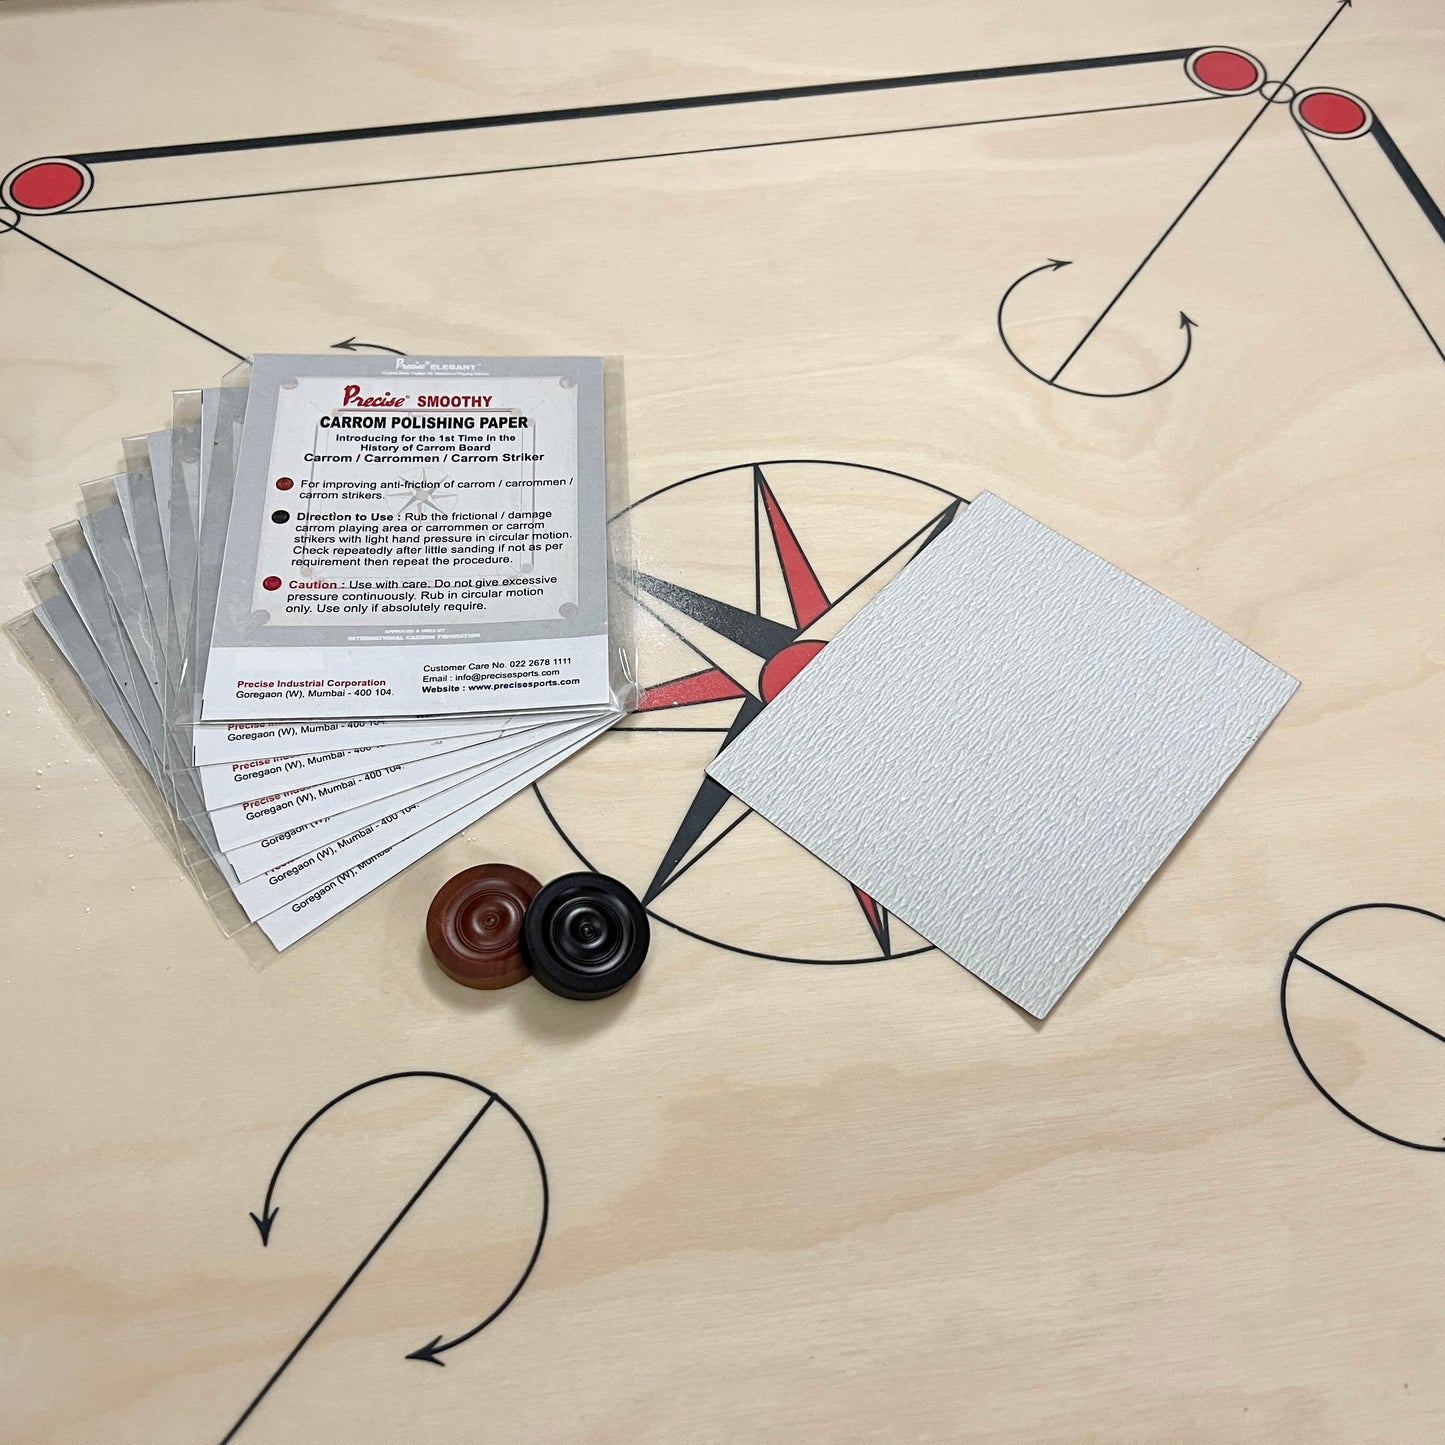 Pack of Precise Smoothy carrom polishing paper by Black Ash Sports, designed to improve the anti-friction qualities of carrom boards, carrommen, and carrom strikers for smoother play.